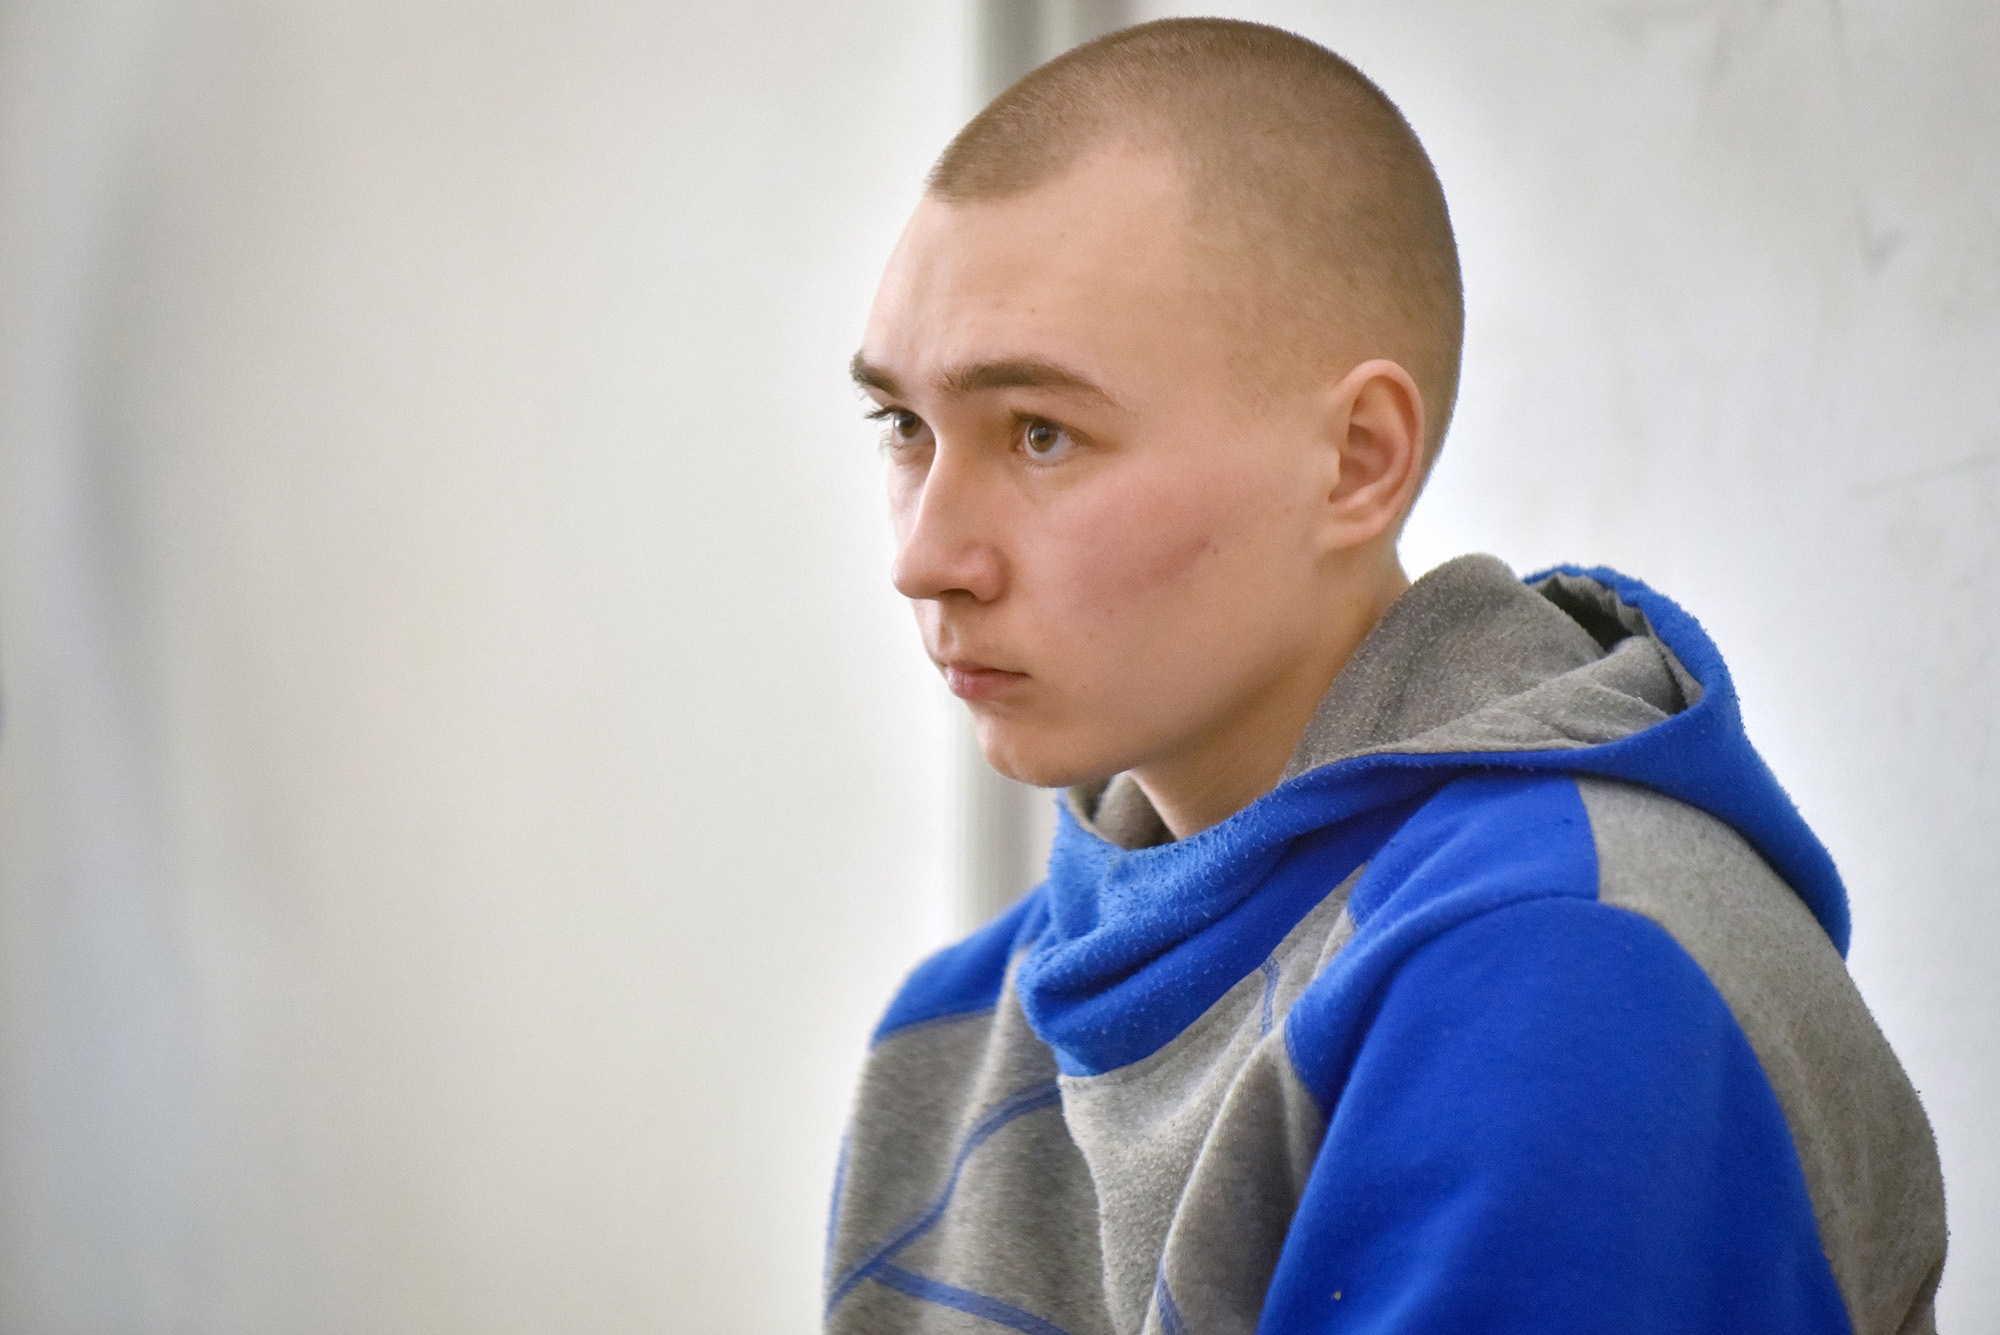 Russian serviceman Vadim Shishimarin sits in the dock on the second day of his war crimes trial in the Solomyansky district court in Kyiv, Ukraine, on 19 May.